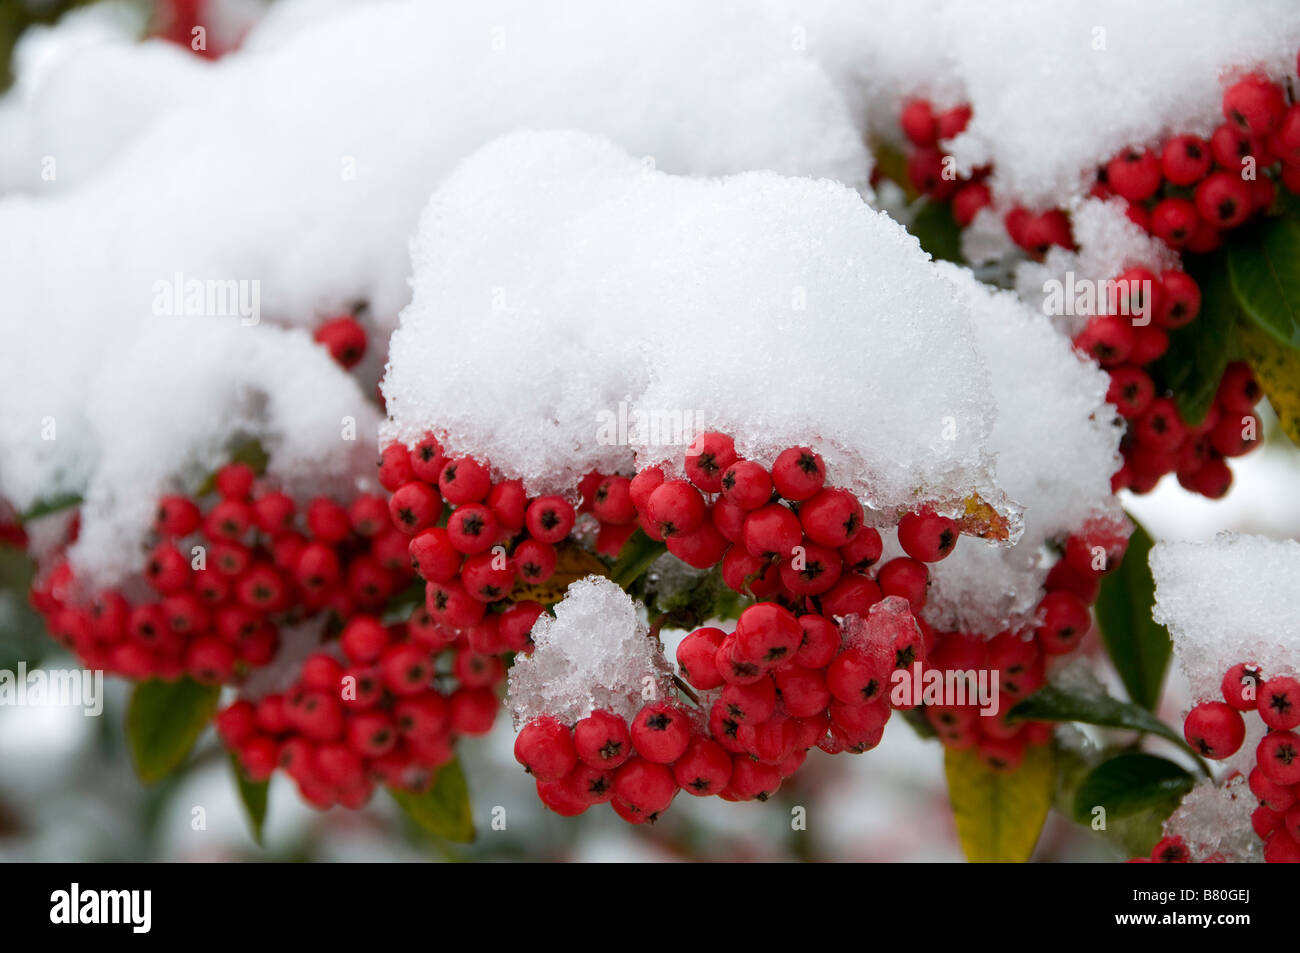 Snow on Cotoneaster berries Stock Photo